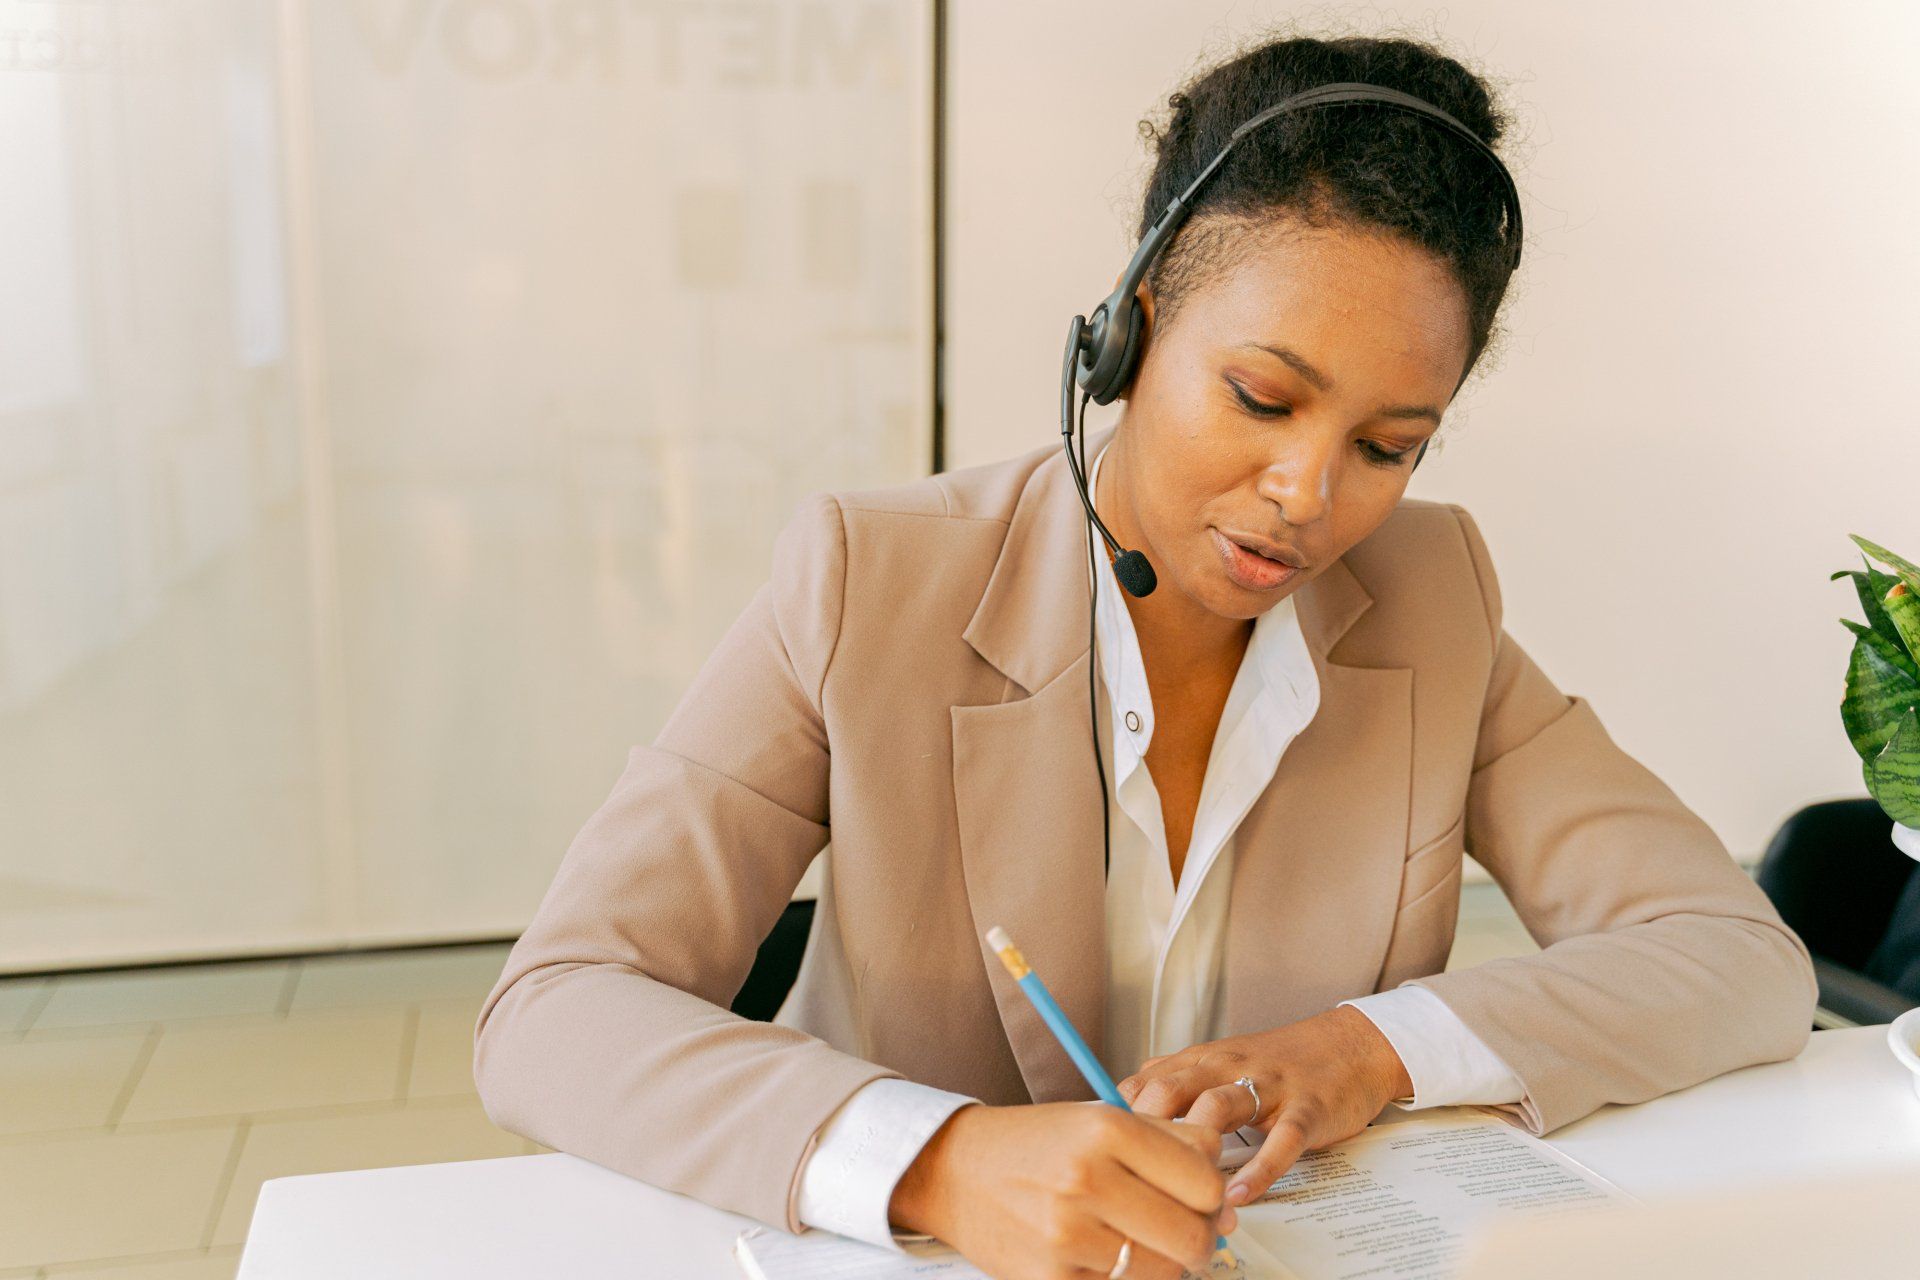 A woman wearing a headset is sitting at a desk writing on a piece of paper.